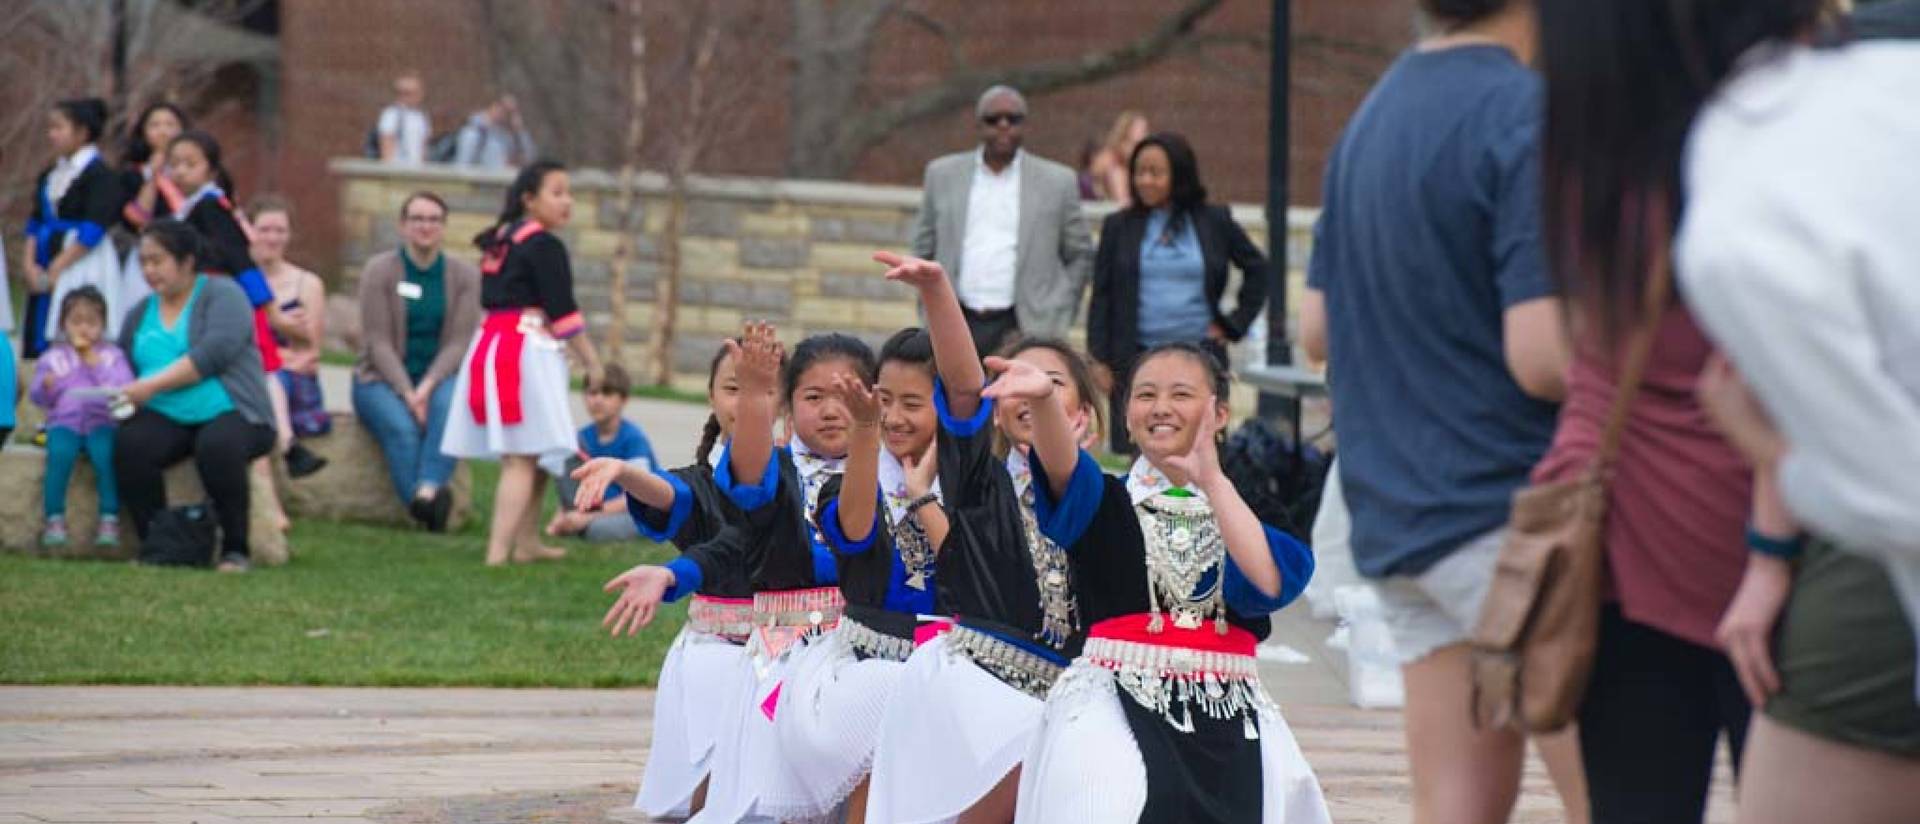 Dancing on the campus mall for Asian Pacific Islander heritage month celebrations